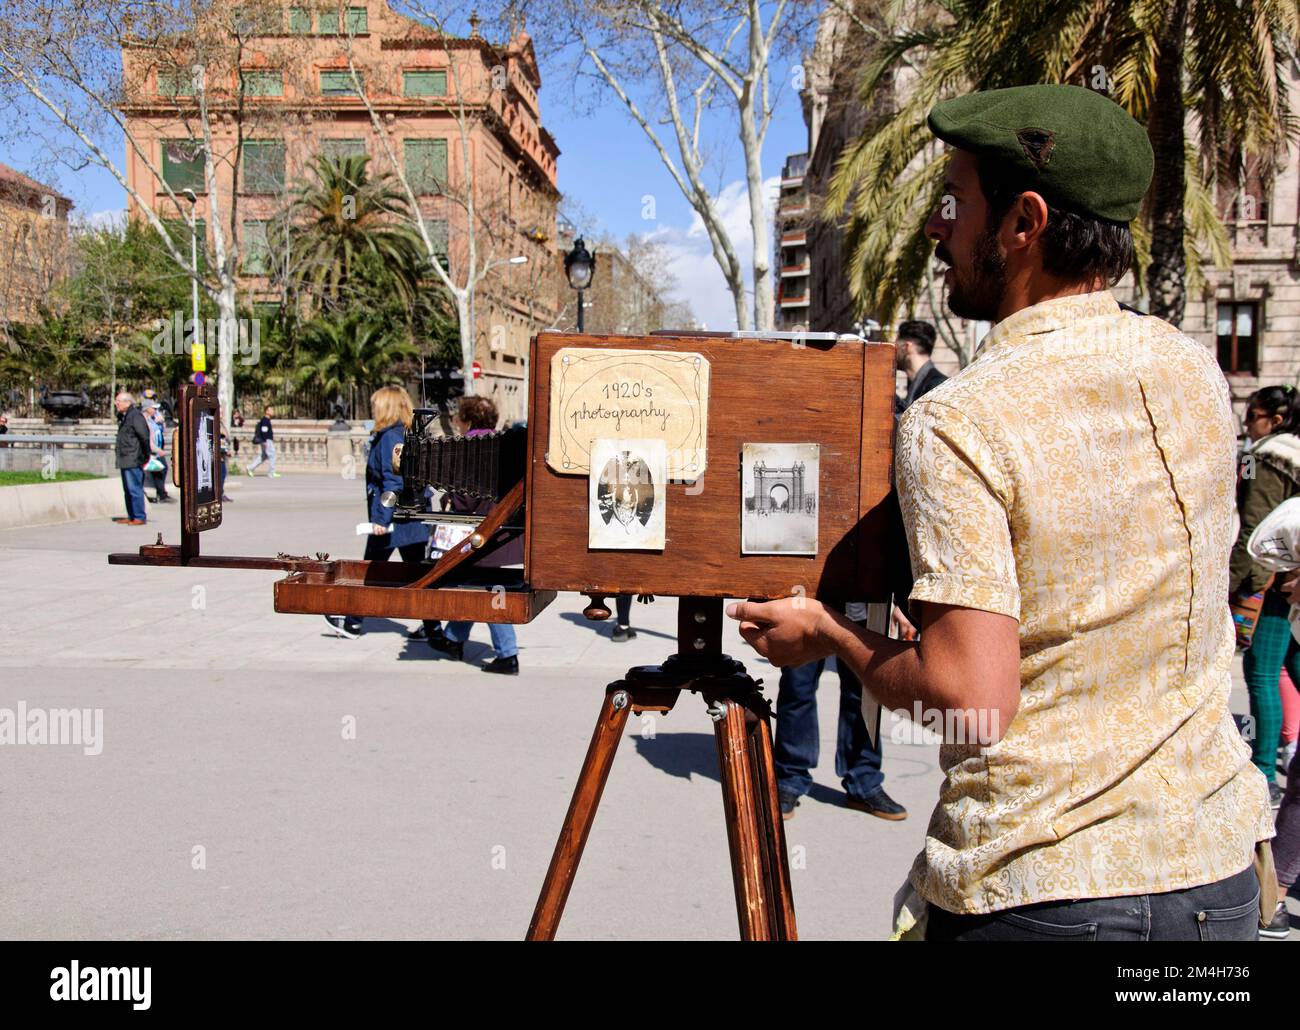 Minute photographer taking pictures with the vintage camera in Avenida Lluís Companys, Barcelona, Ciutat Vella, Spain Stock Photo